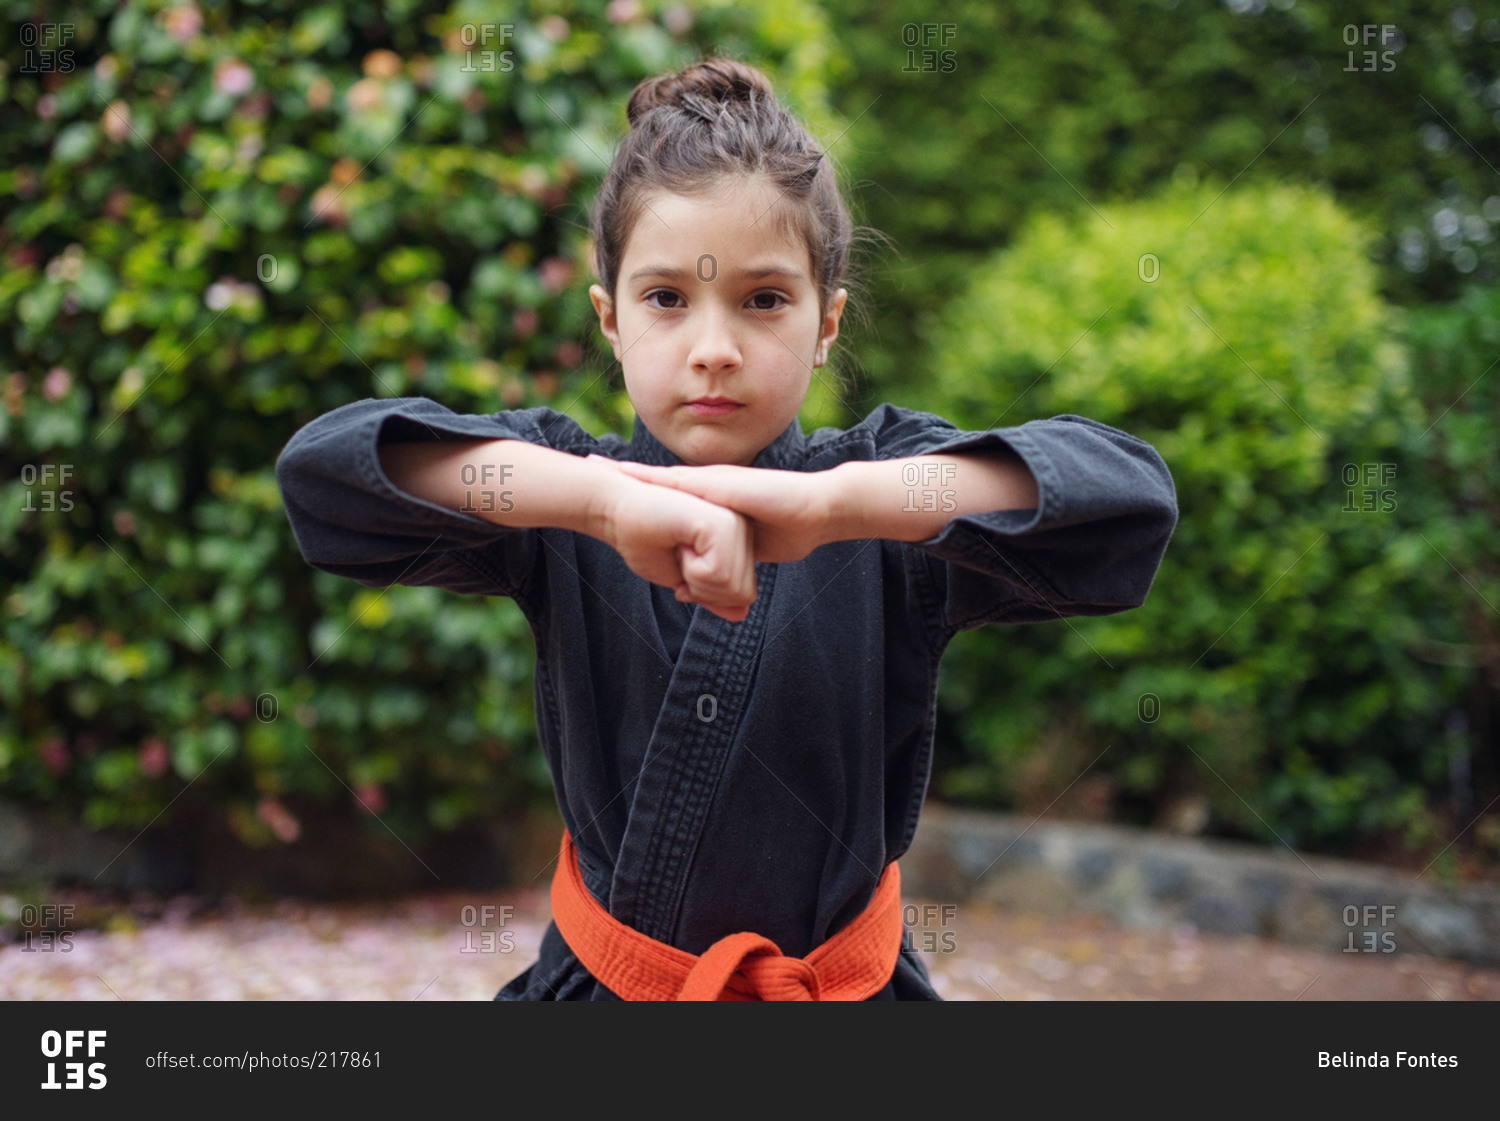 A girl in a karate uniform raises her fist to her chin